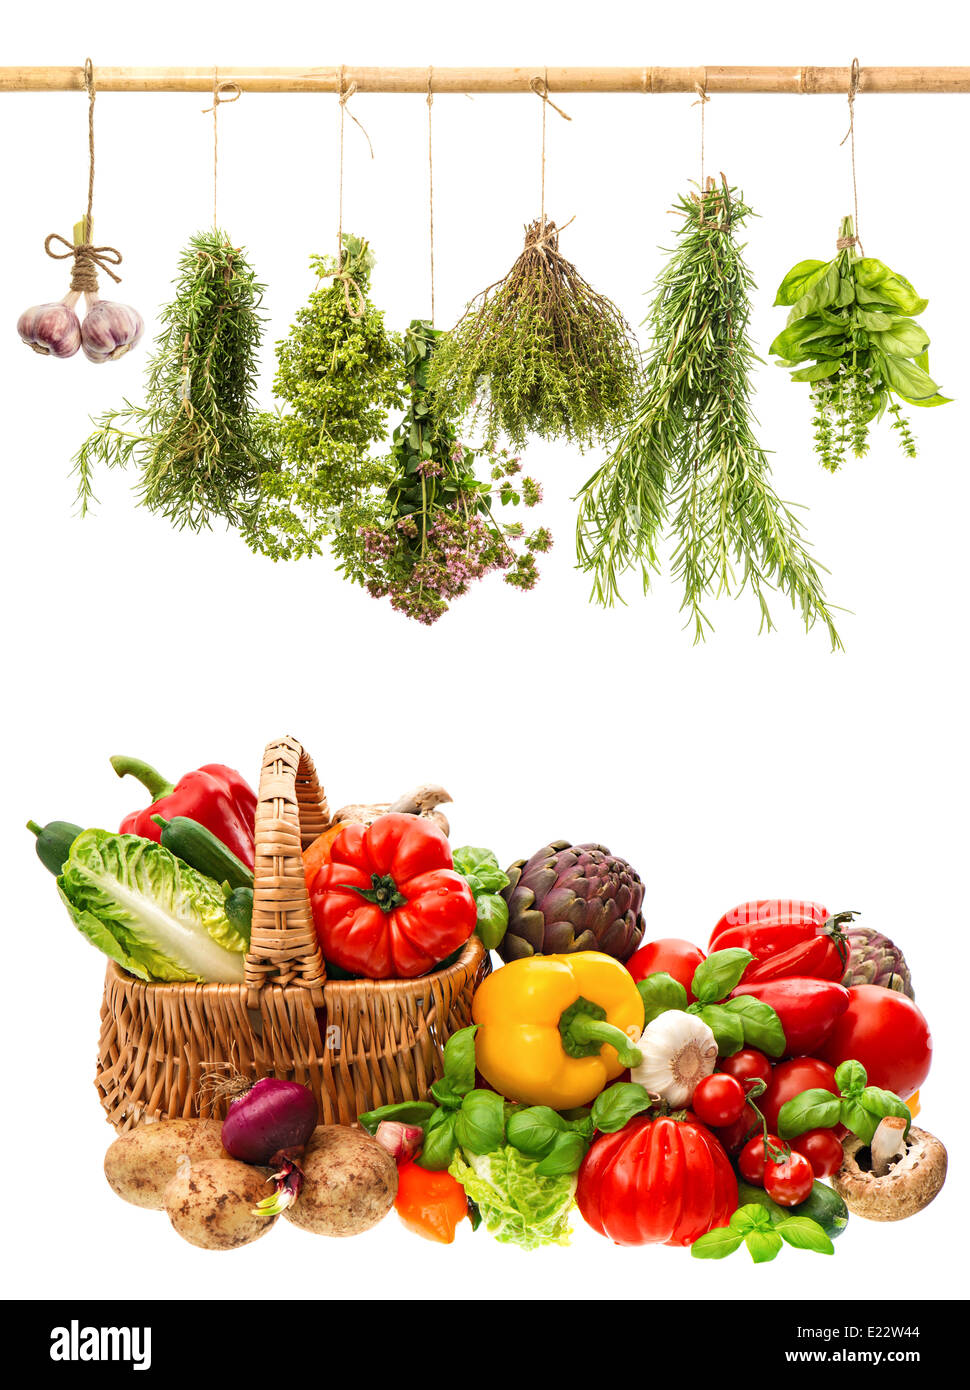 vegetables and herbs on white background. healthy food concept. organic diary products. shopping basket Stock Photo